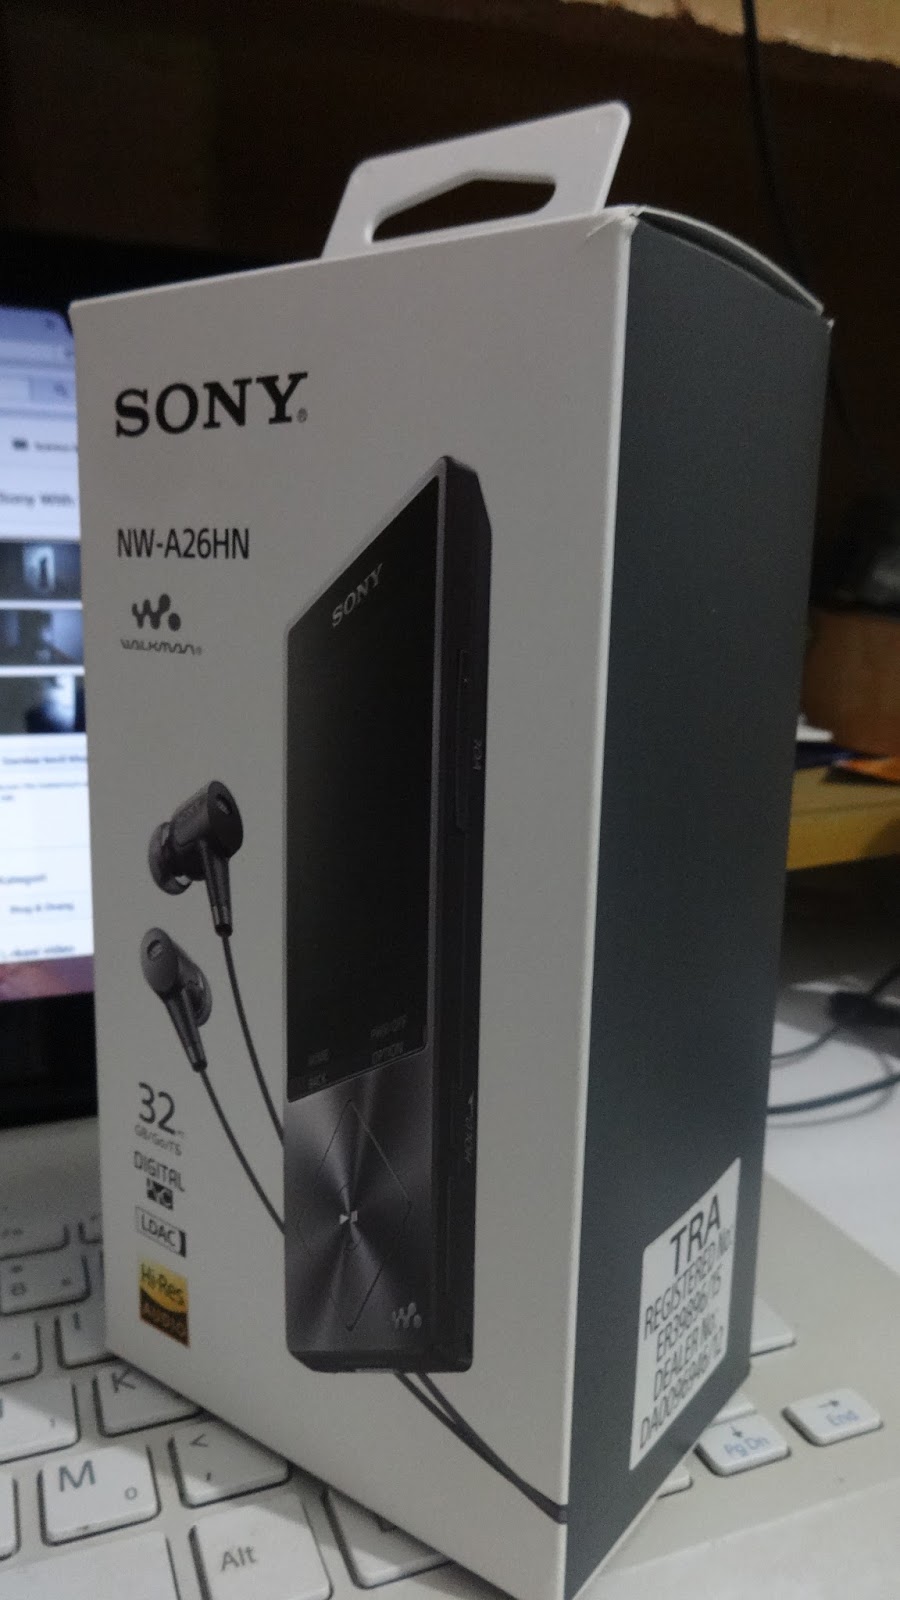 Unboxing Sony Walkman NW-A26HN: Hi-Res Music Player From Sony With